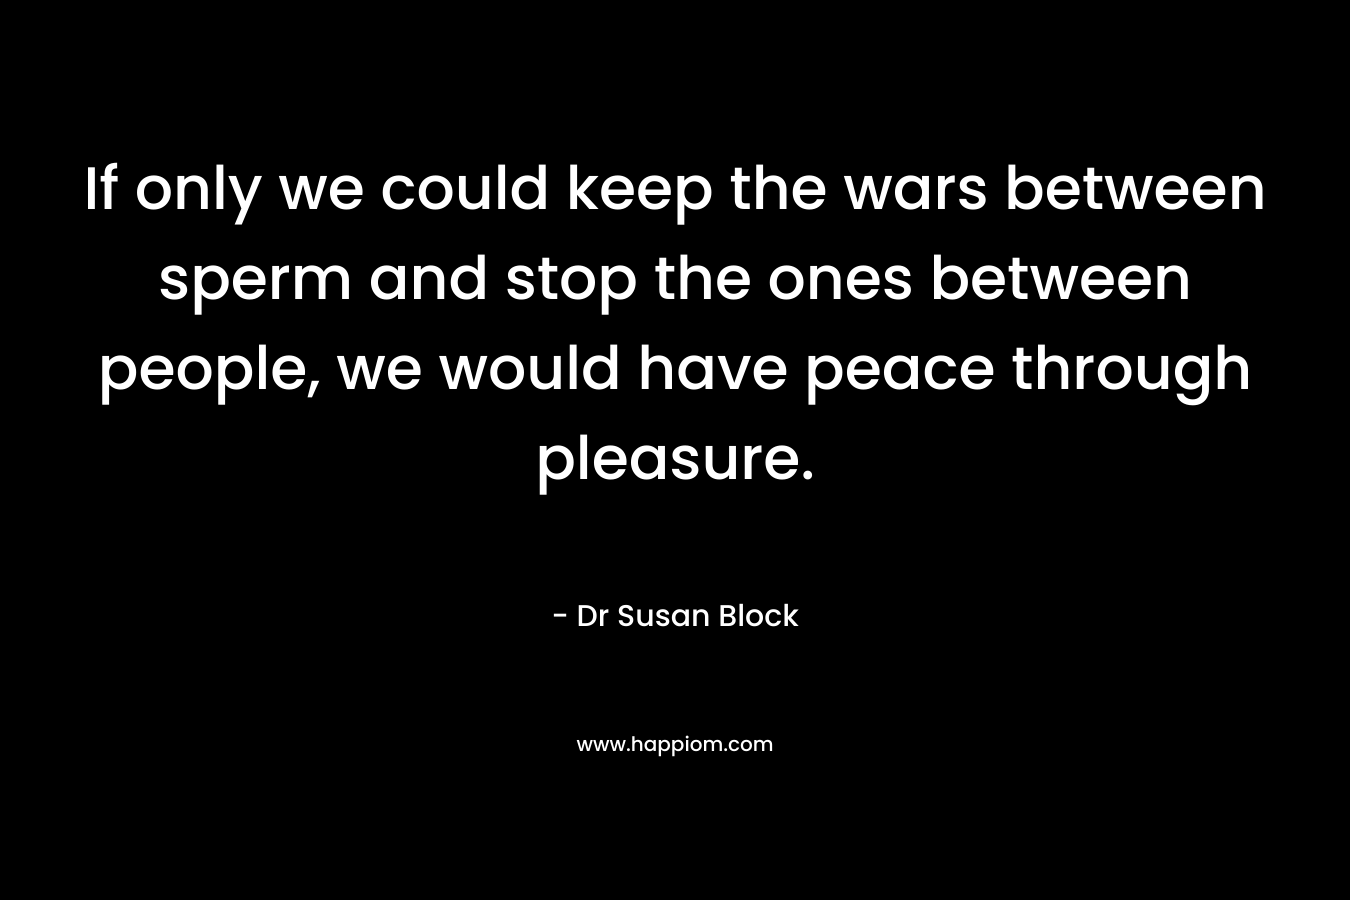 If only we could keep the wars between sperm and stop the ones between people, we would have peace through pleasure. – Dr Susan Block